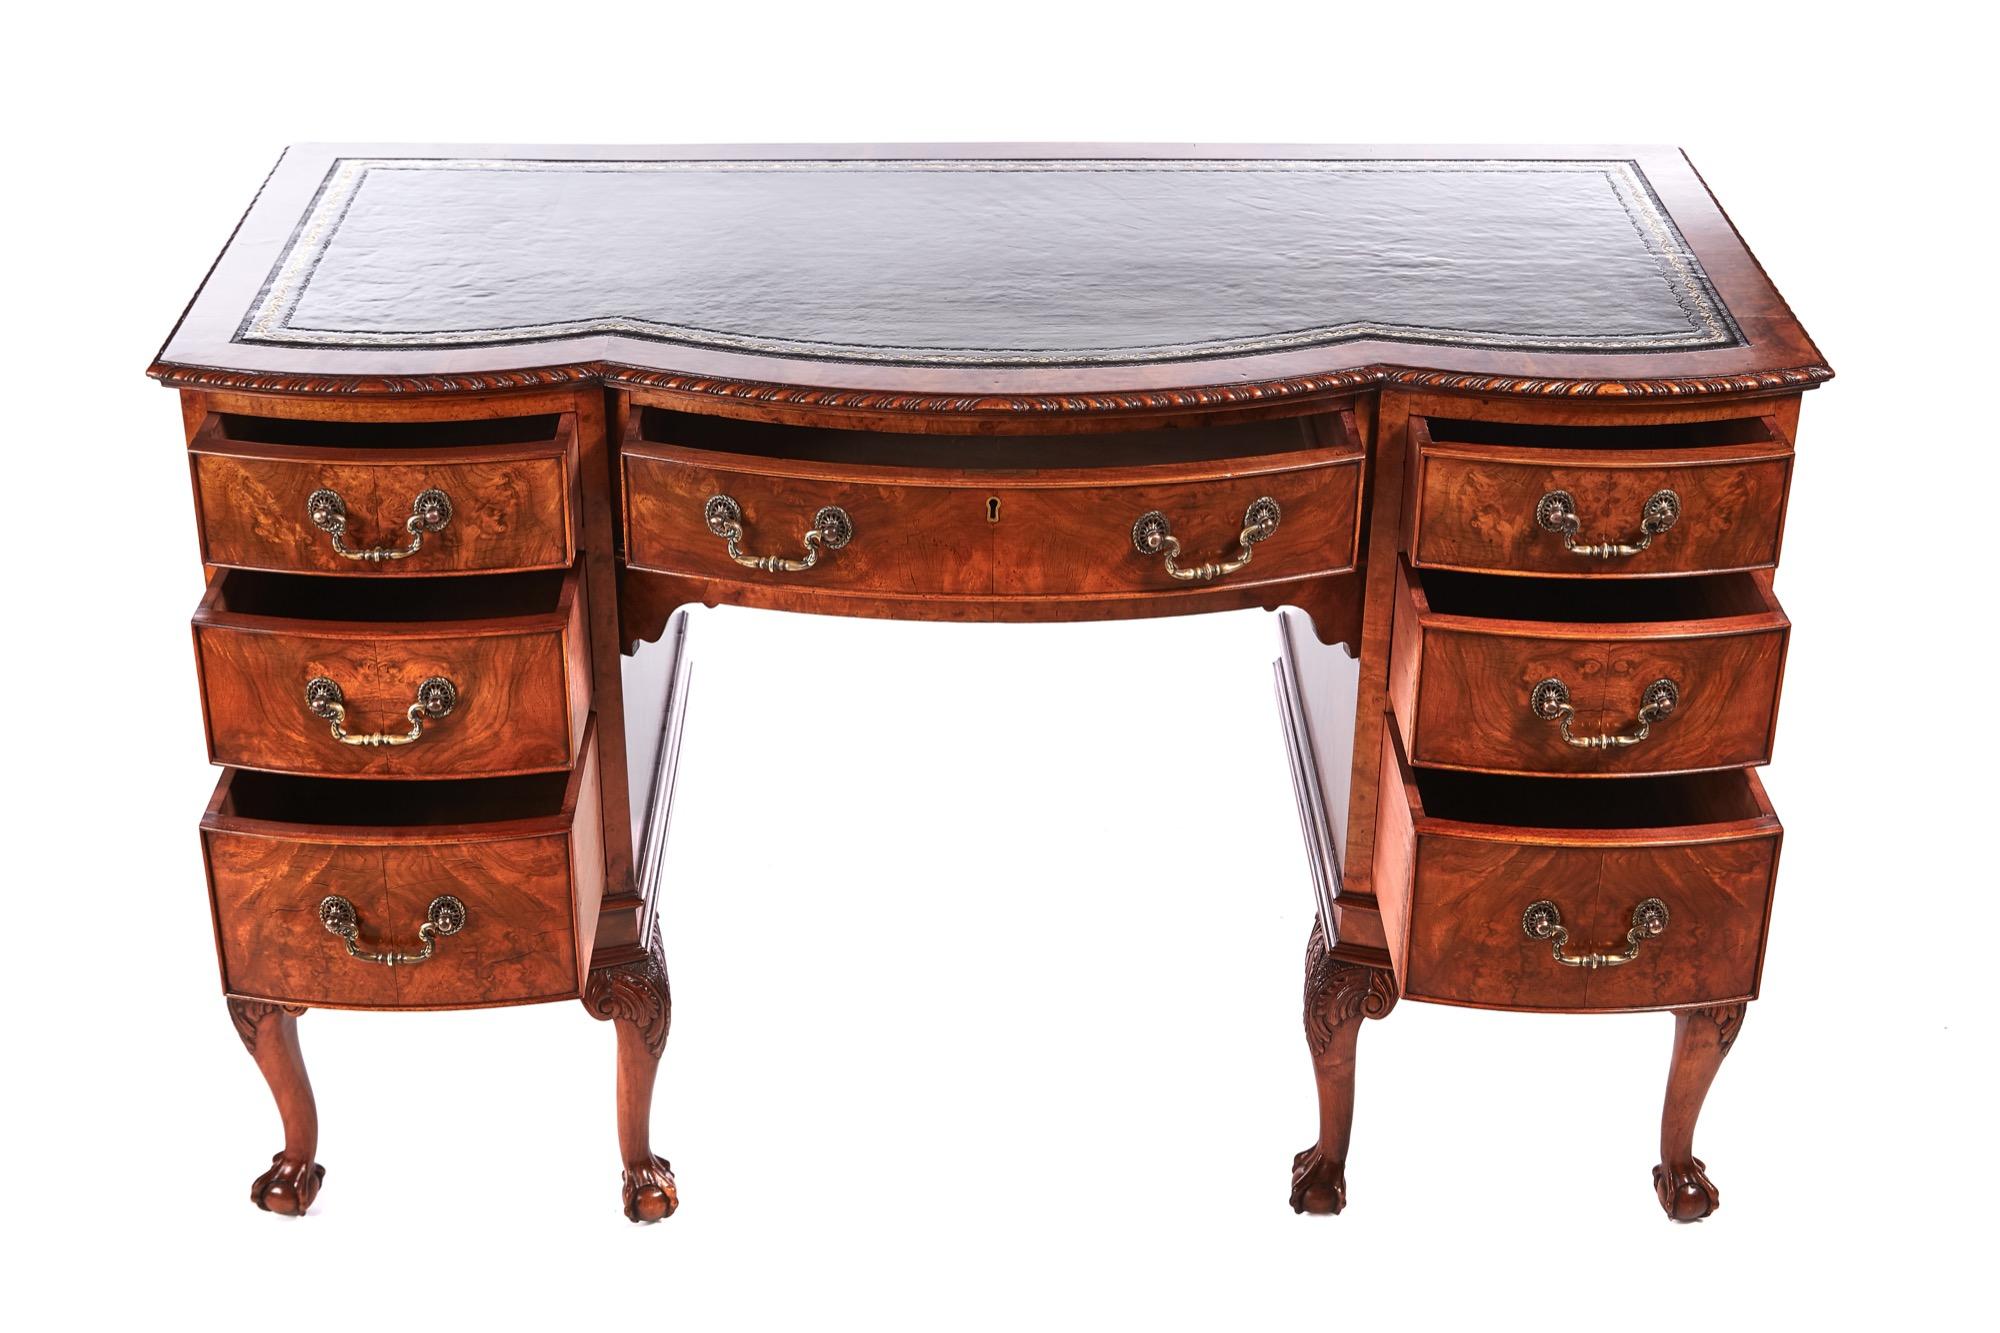 Antique burr walnut freestanding knee hole writing desk having a green leather top, burr walnut cross banding and a carved edge. 7 shaped burr walnut drawers with original brass handles standing on 6 carved cabriole legs with claw and ball